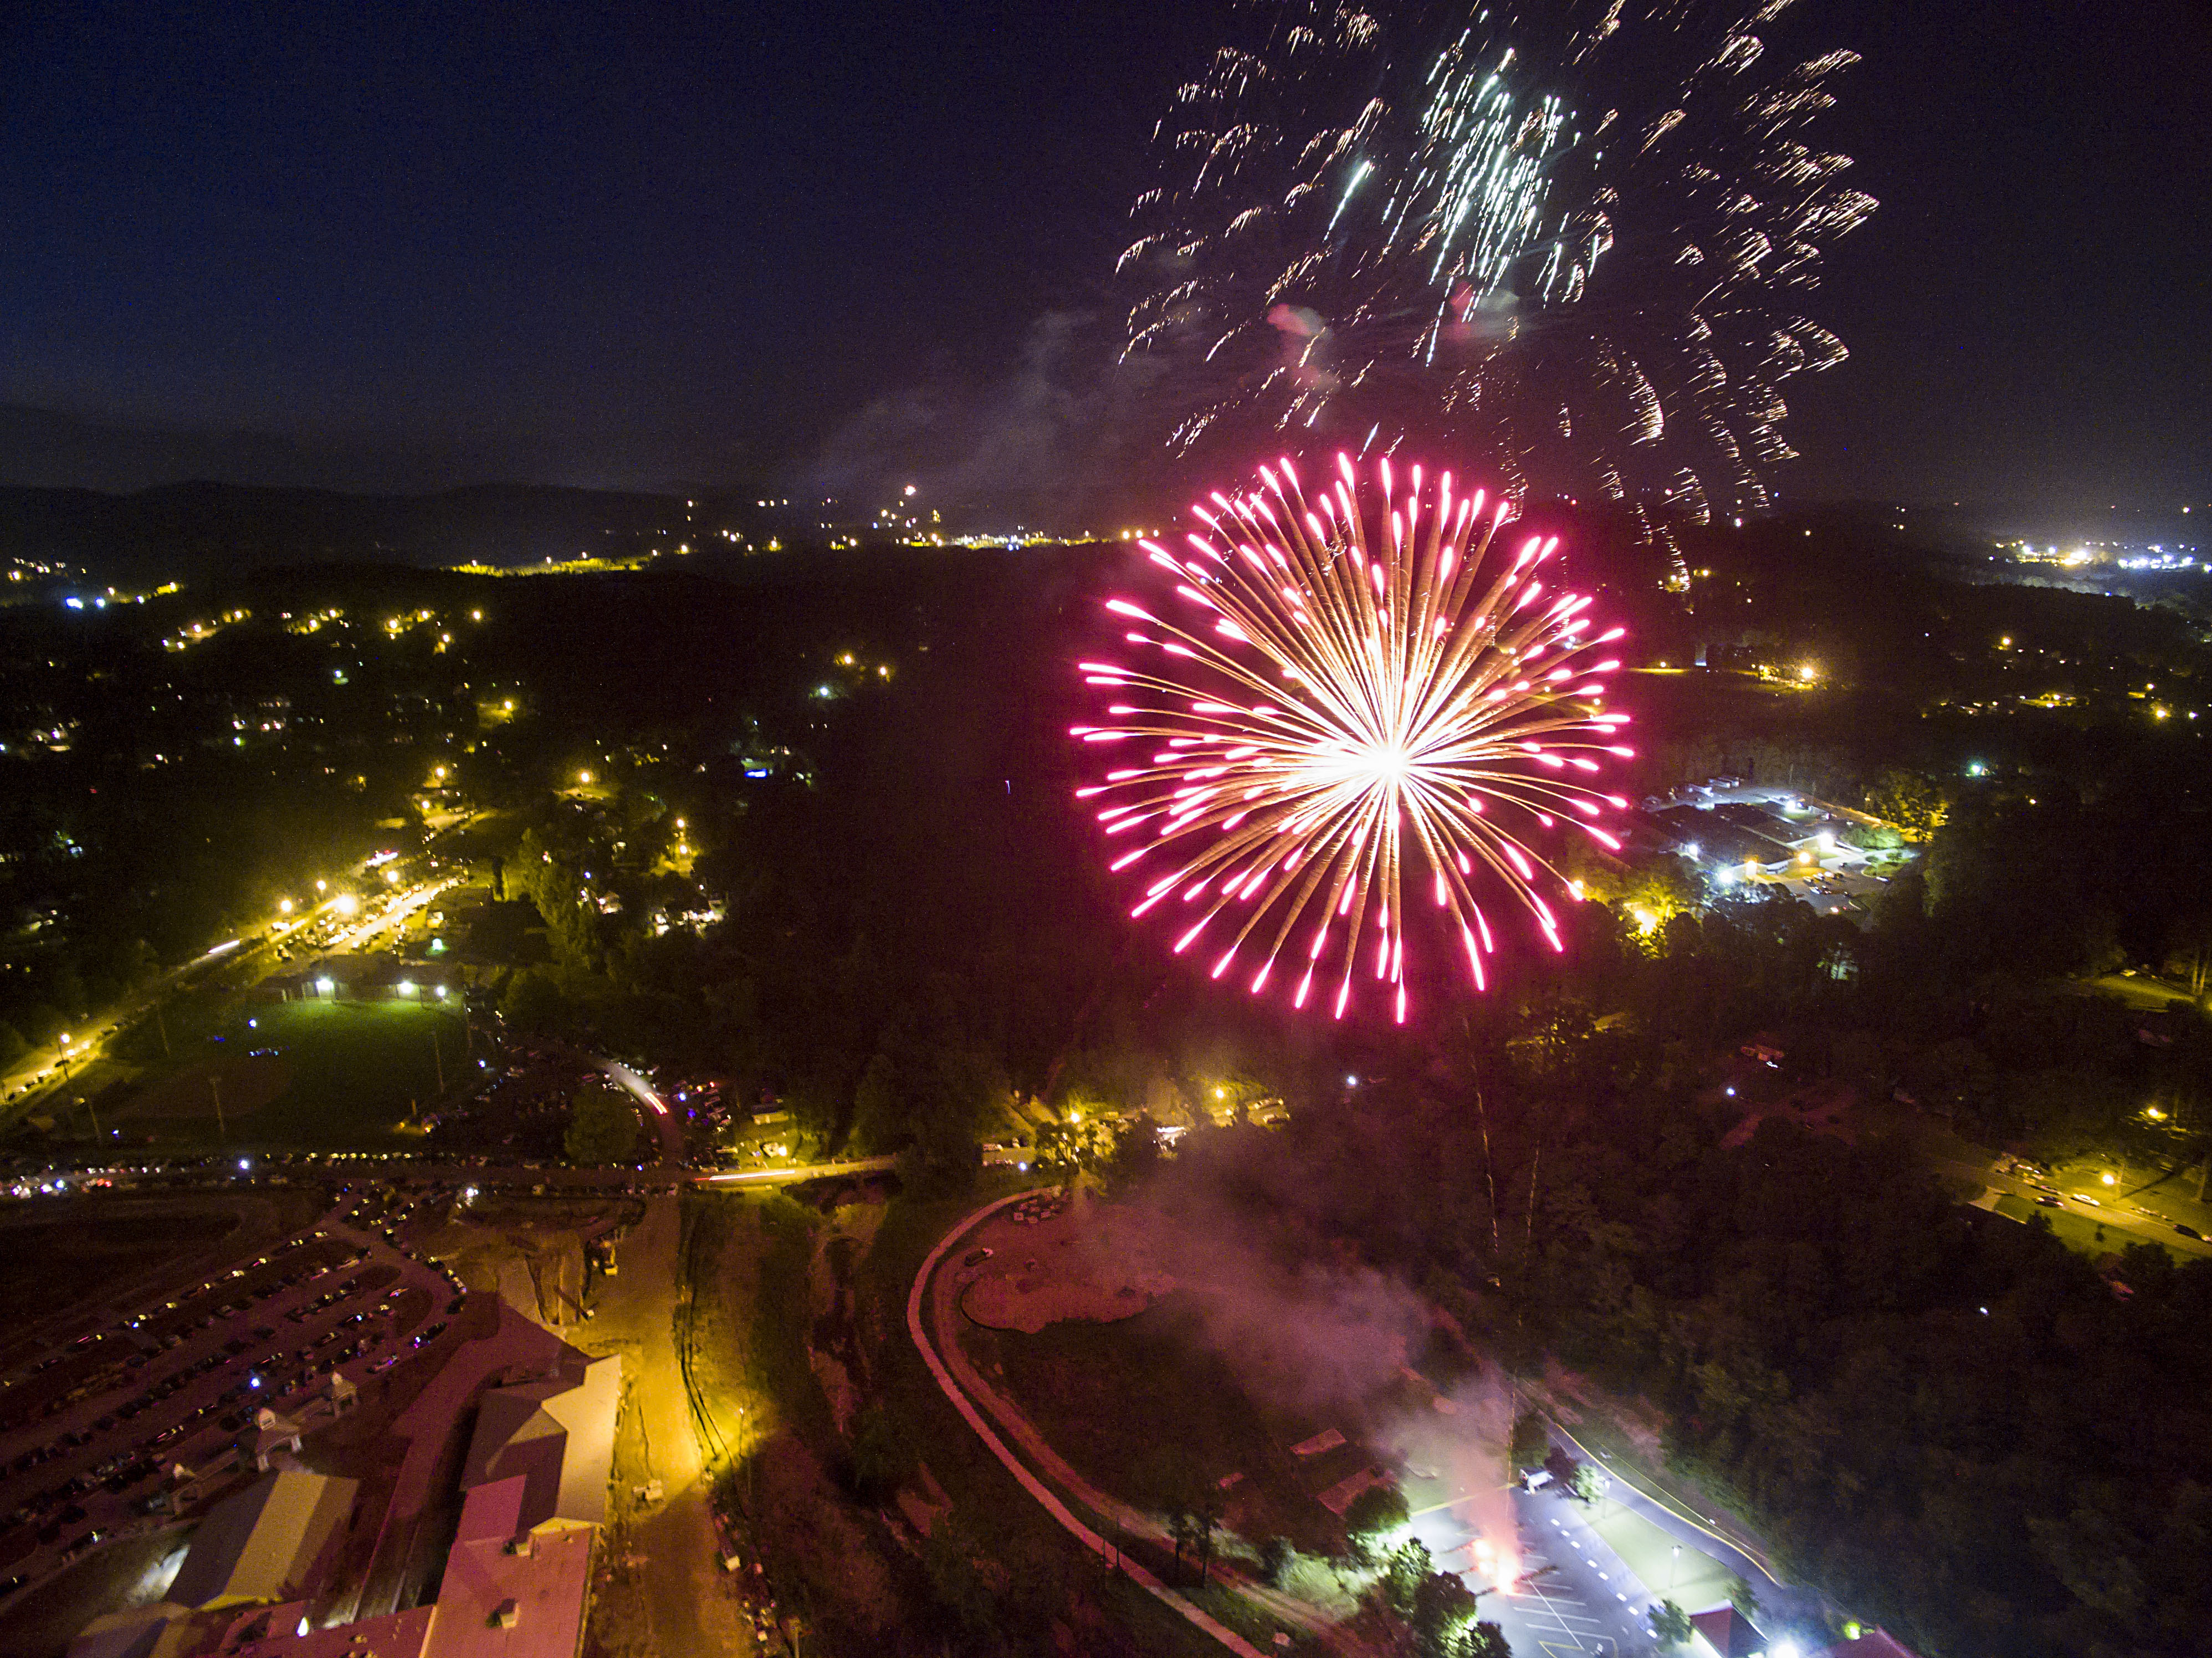 10th Annual Trussville Freedom Celebration kicks off July 4